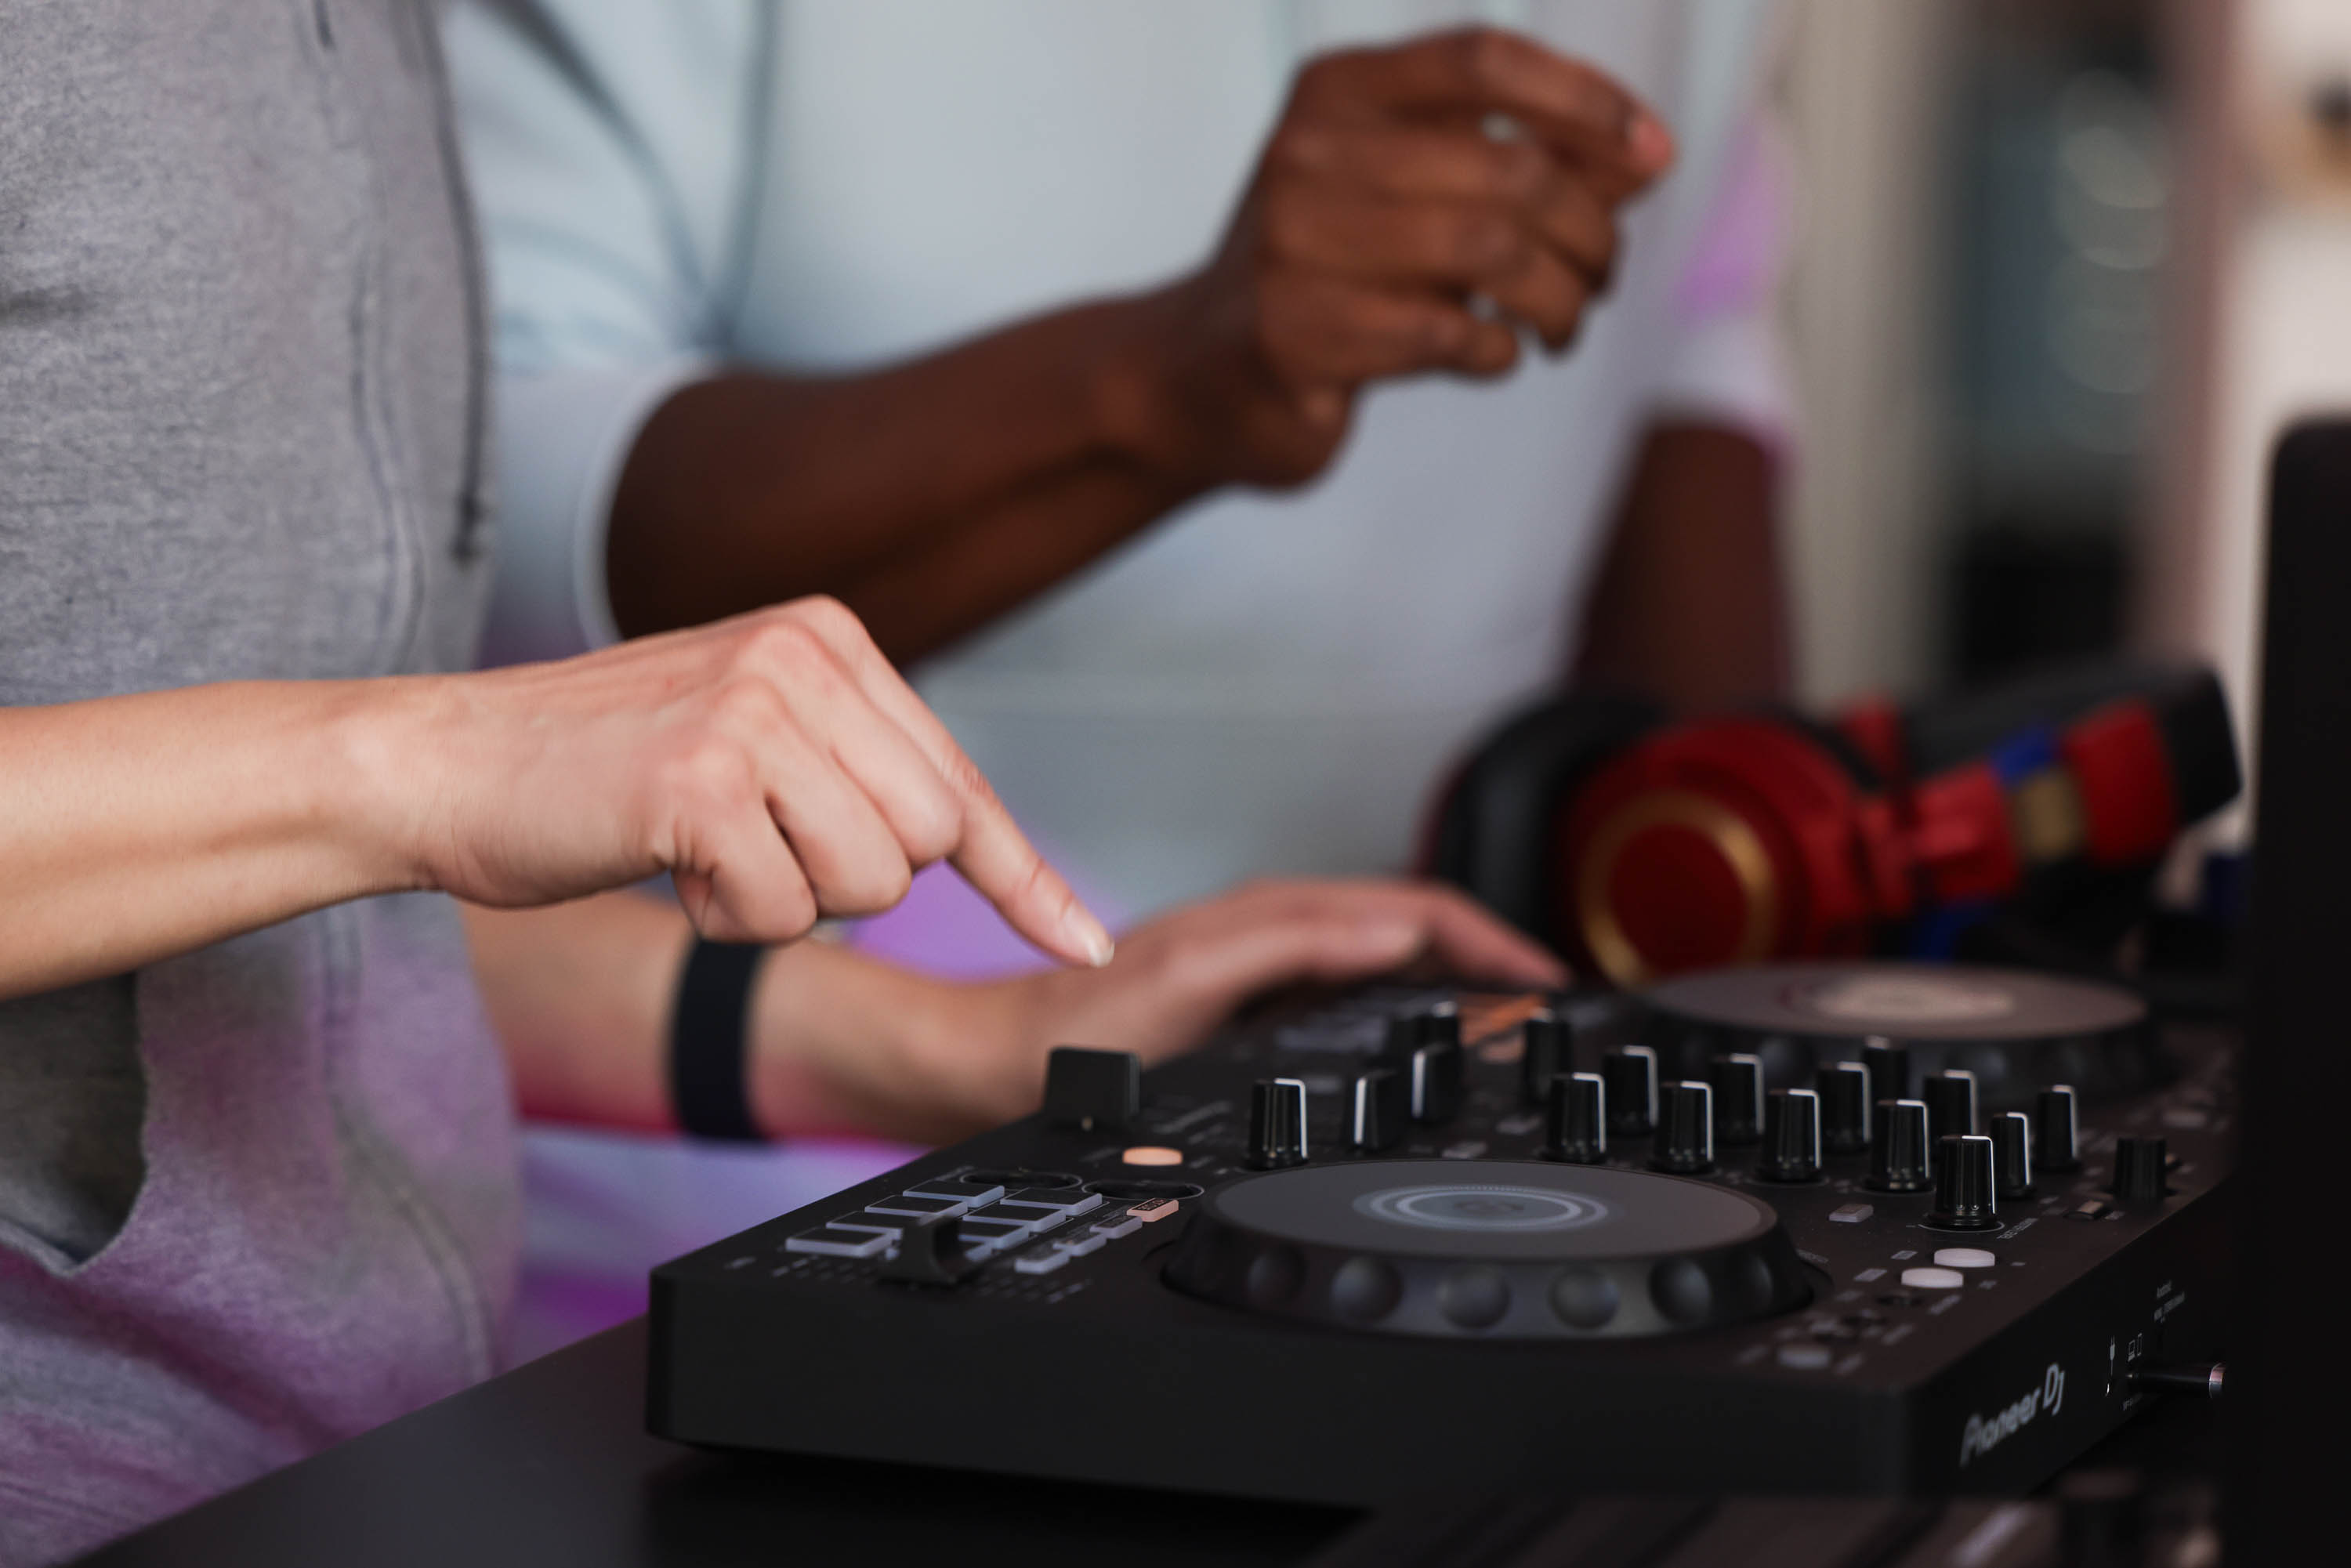 Two people operate a DJ mixing console with knobs and buttons; headphones lie in the background.